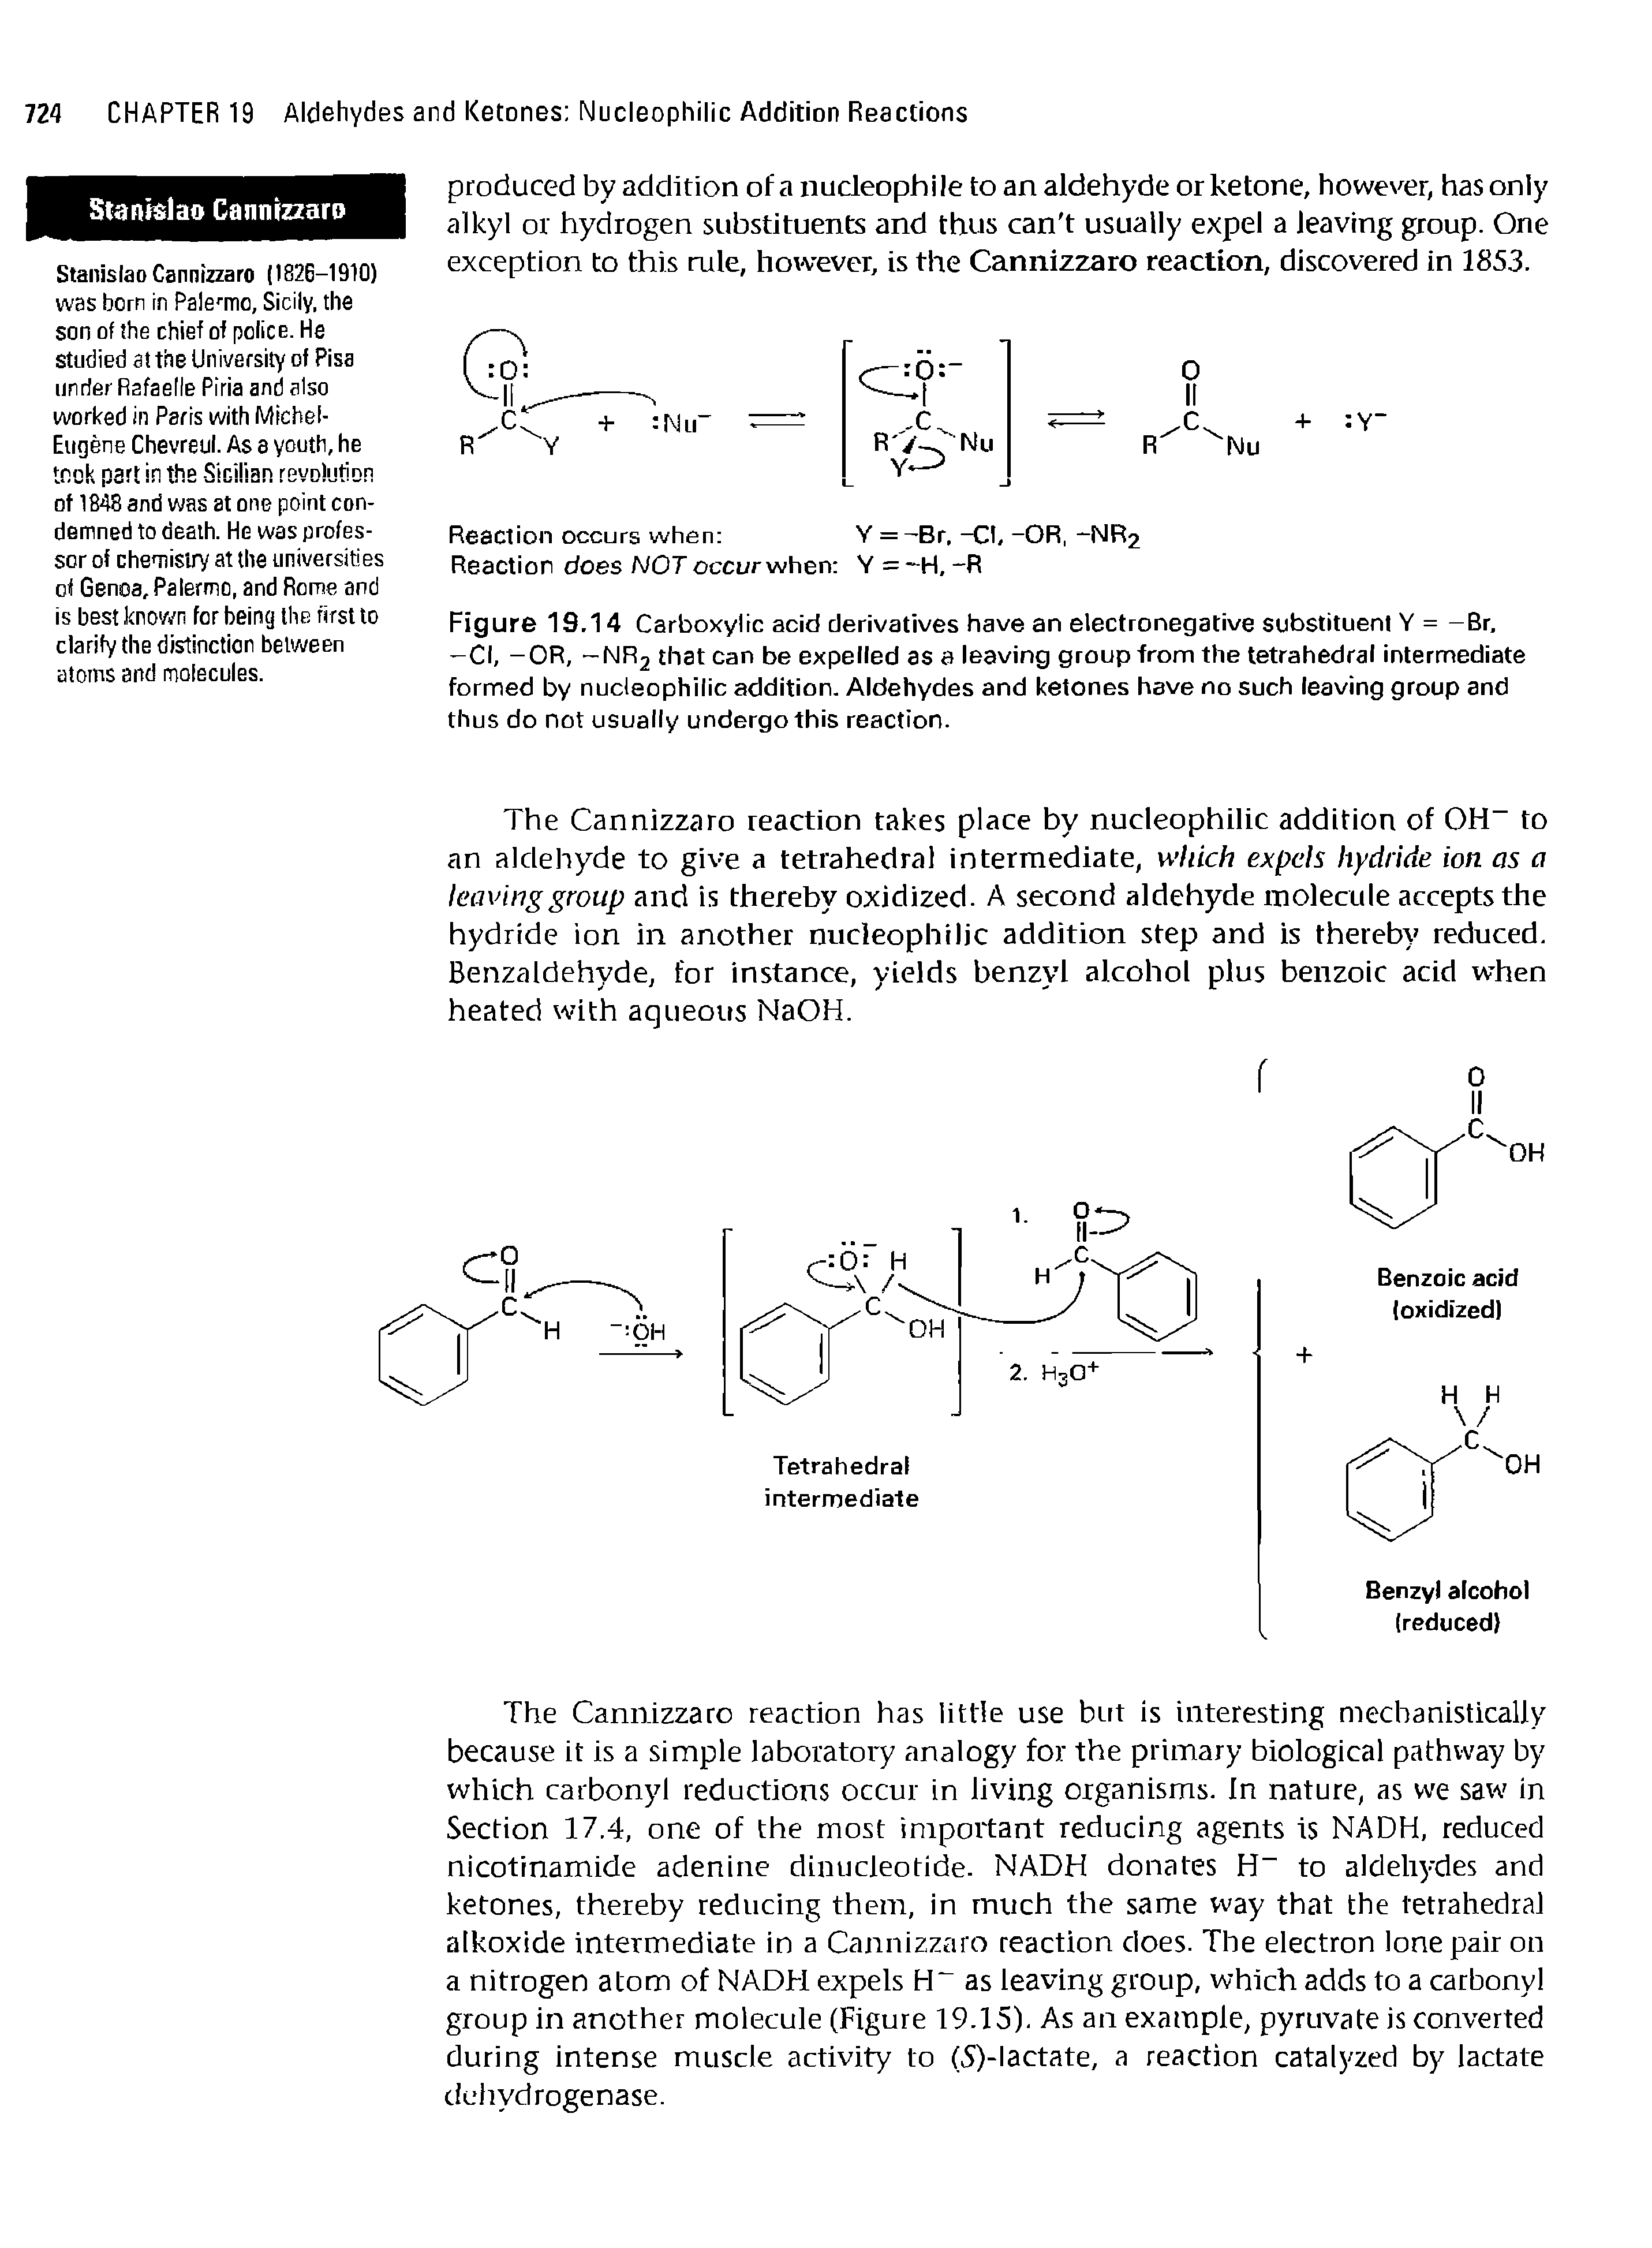 Figure 19.14 Carboxylic acid derivatives have an electronegative substituent Y = -Br, —Cl, -OR, -NR2 that can be expelled as a leaving group from the tetrahedral intermediate formed by nucleophilic addition. Aldehydes and ketones have no such leaving group and thus do not usually undergo this reaction.